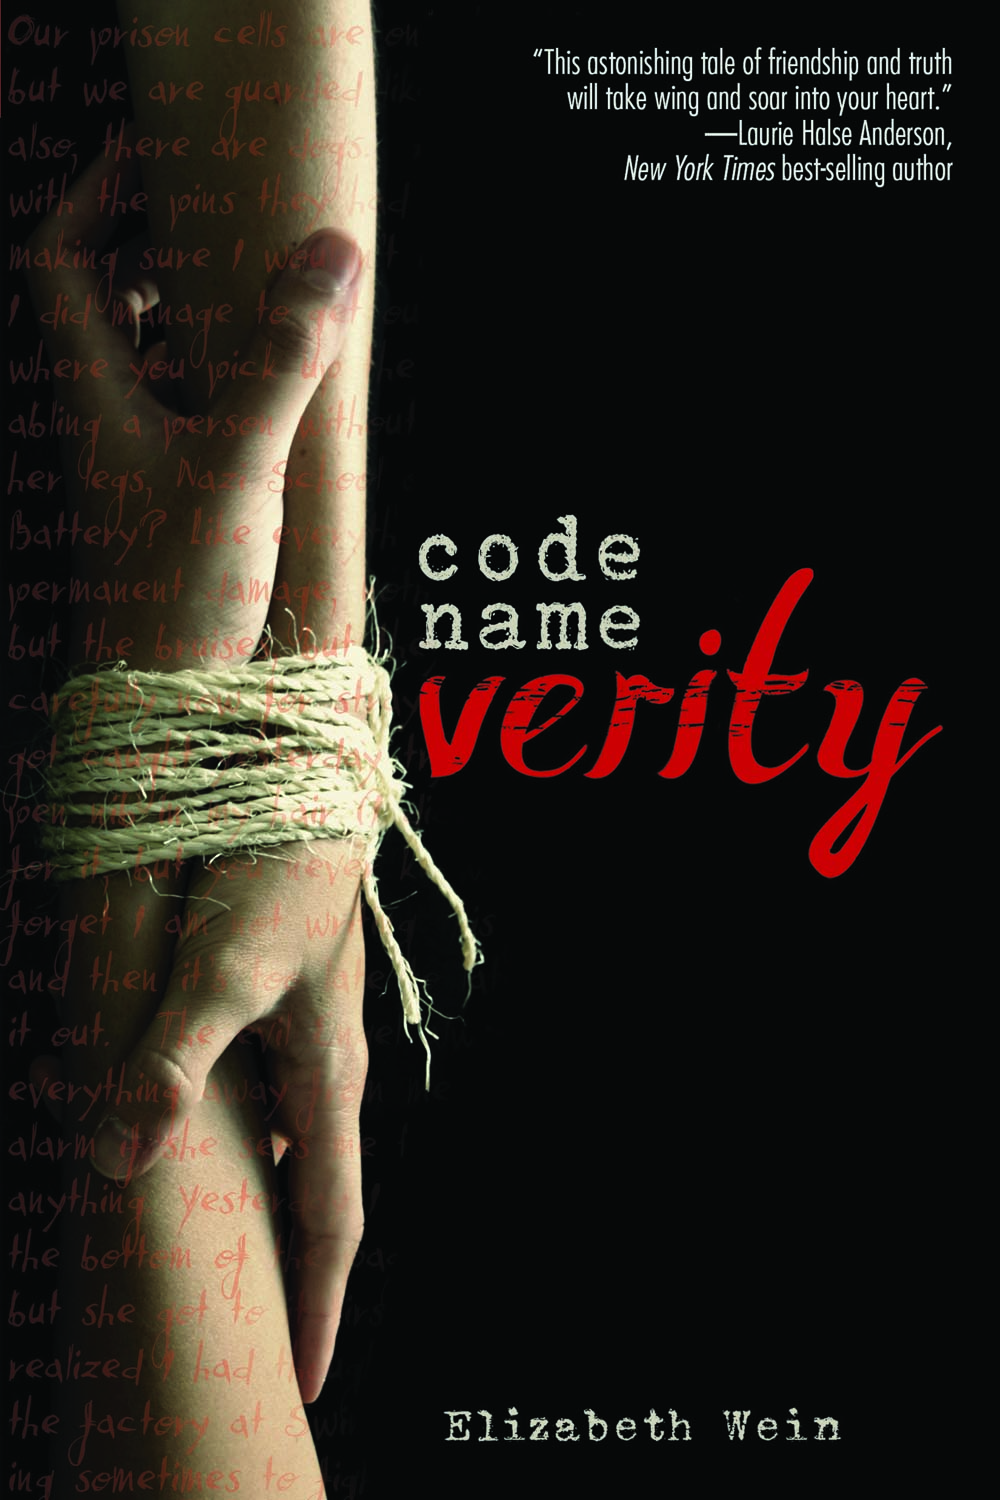 This is a review of the book Code Name Verity.